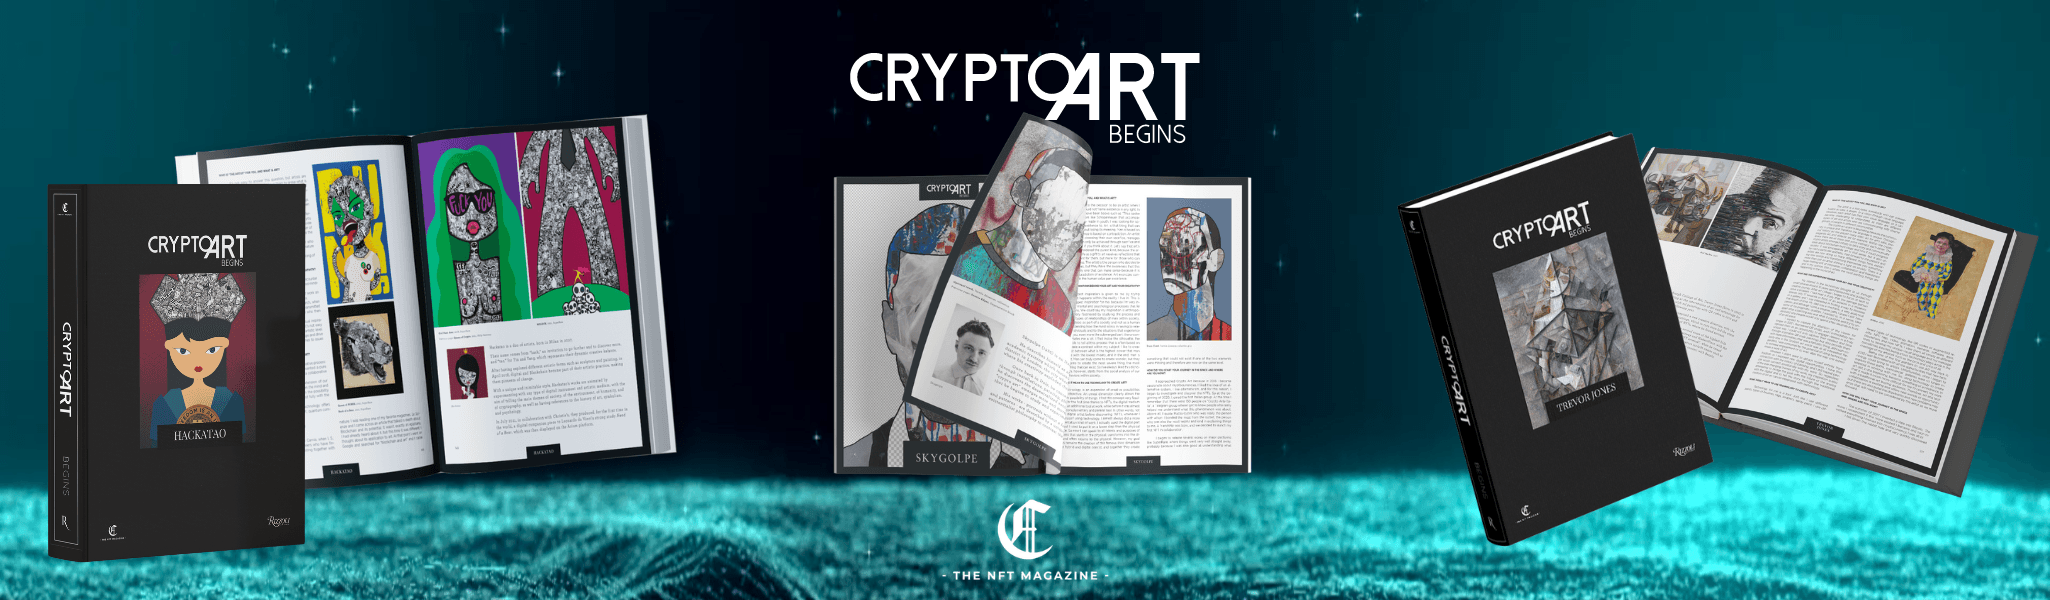 CRYPTO ART BEGINS by The NFT Magazine